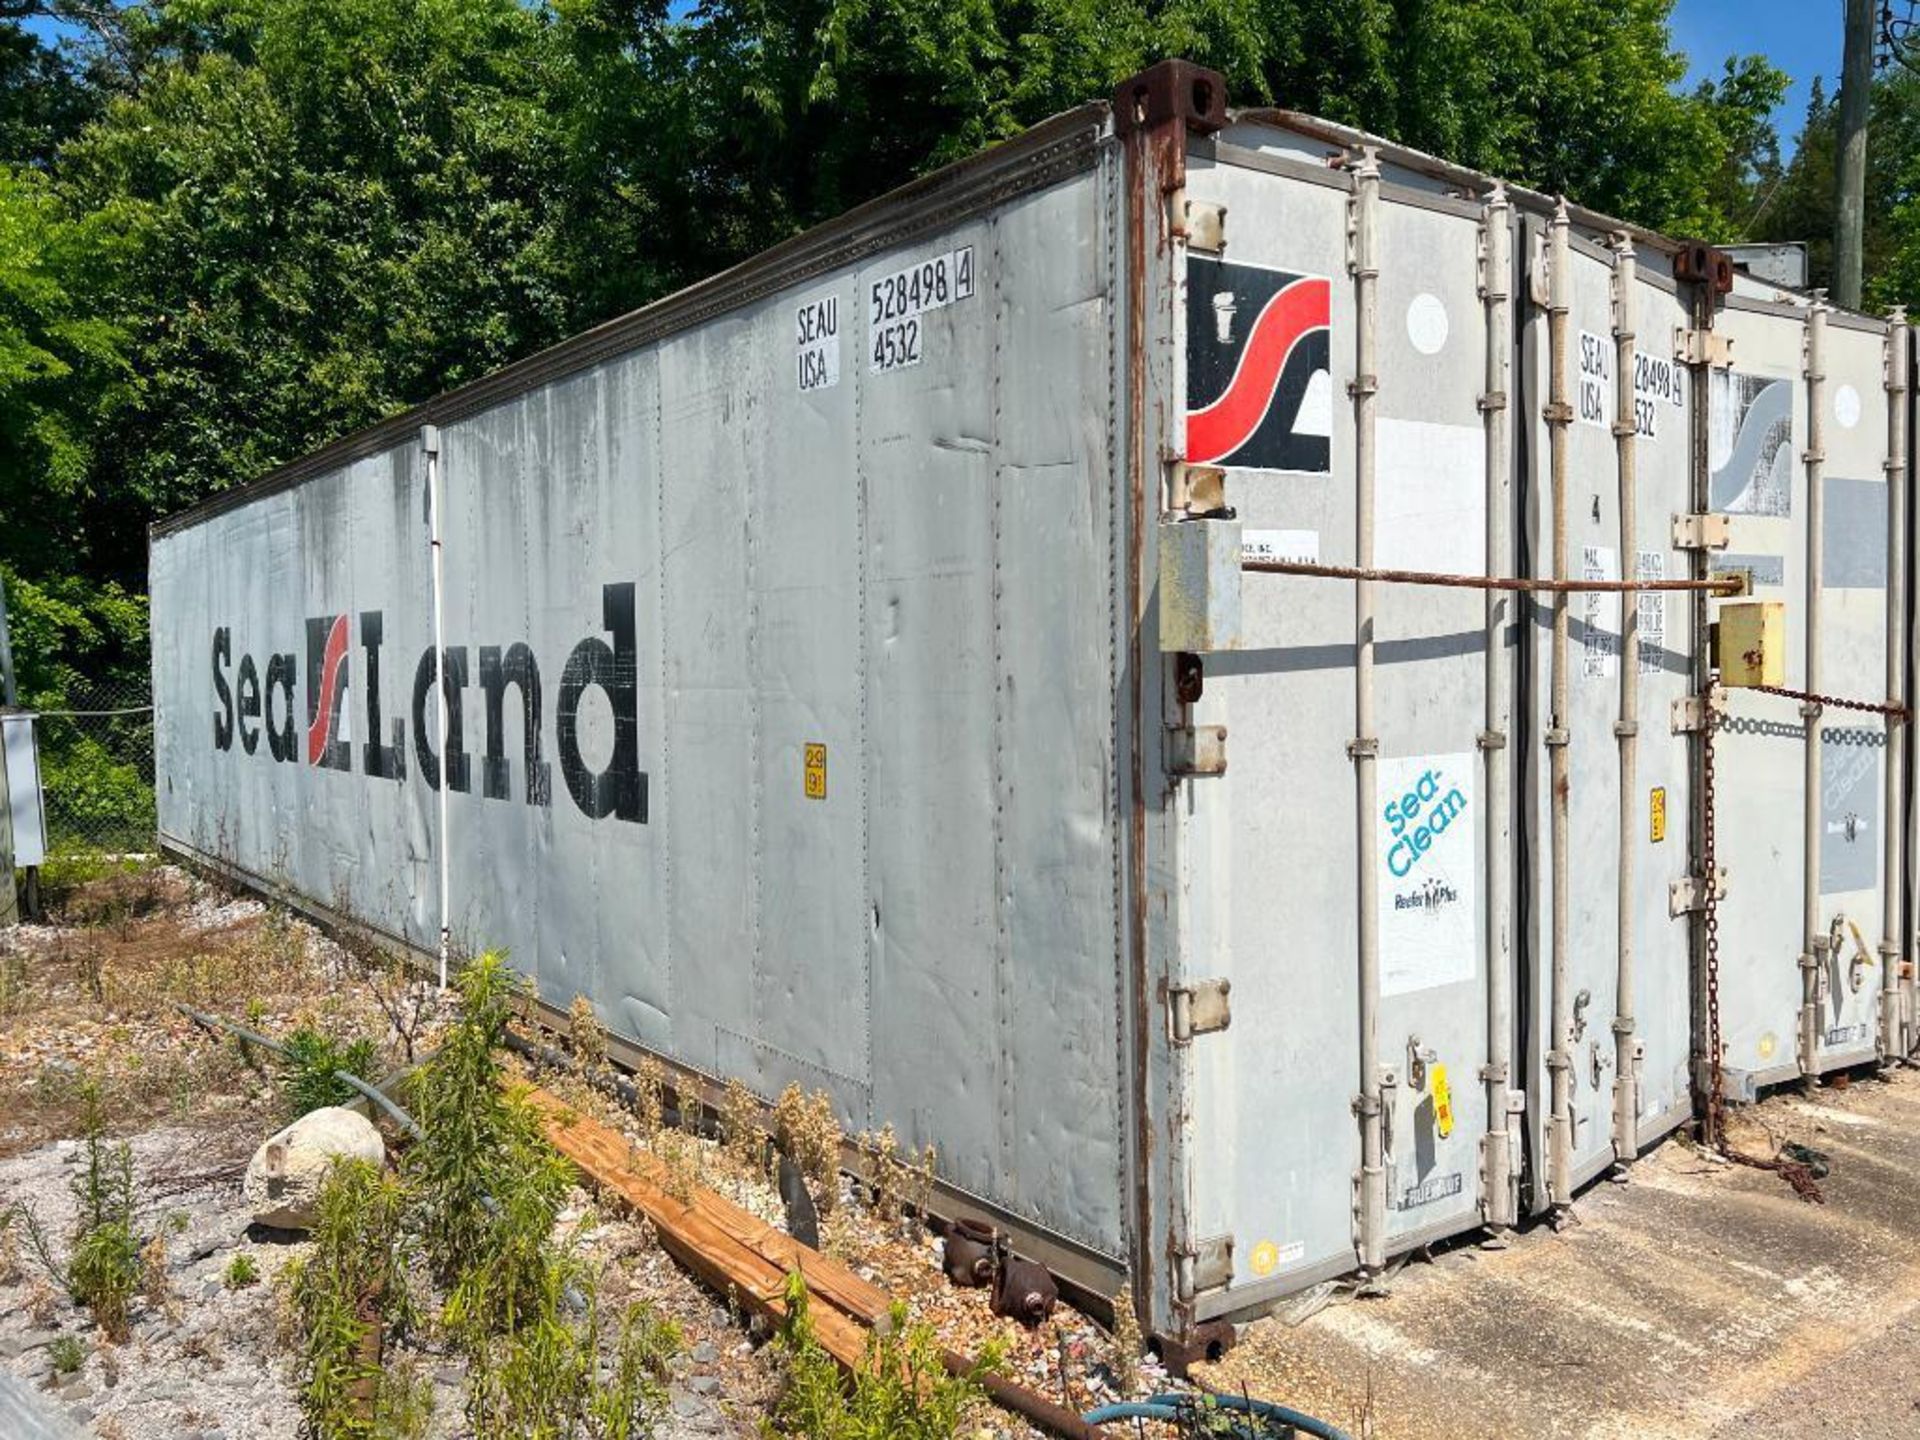 Reefer Plus Sea Land 67,200 LB Capacity Shipping Container, Dimensions = 40' x 10' - Image 2 of 2